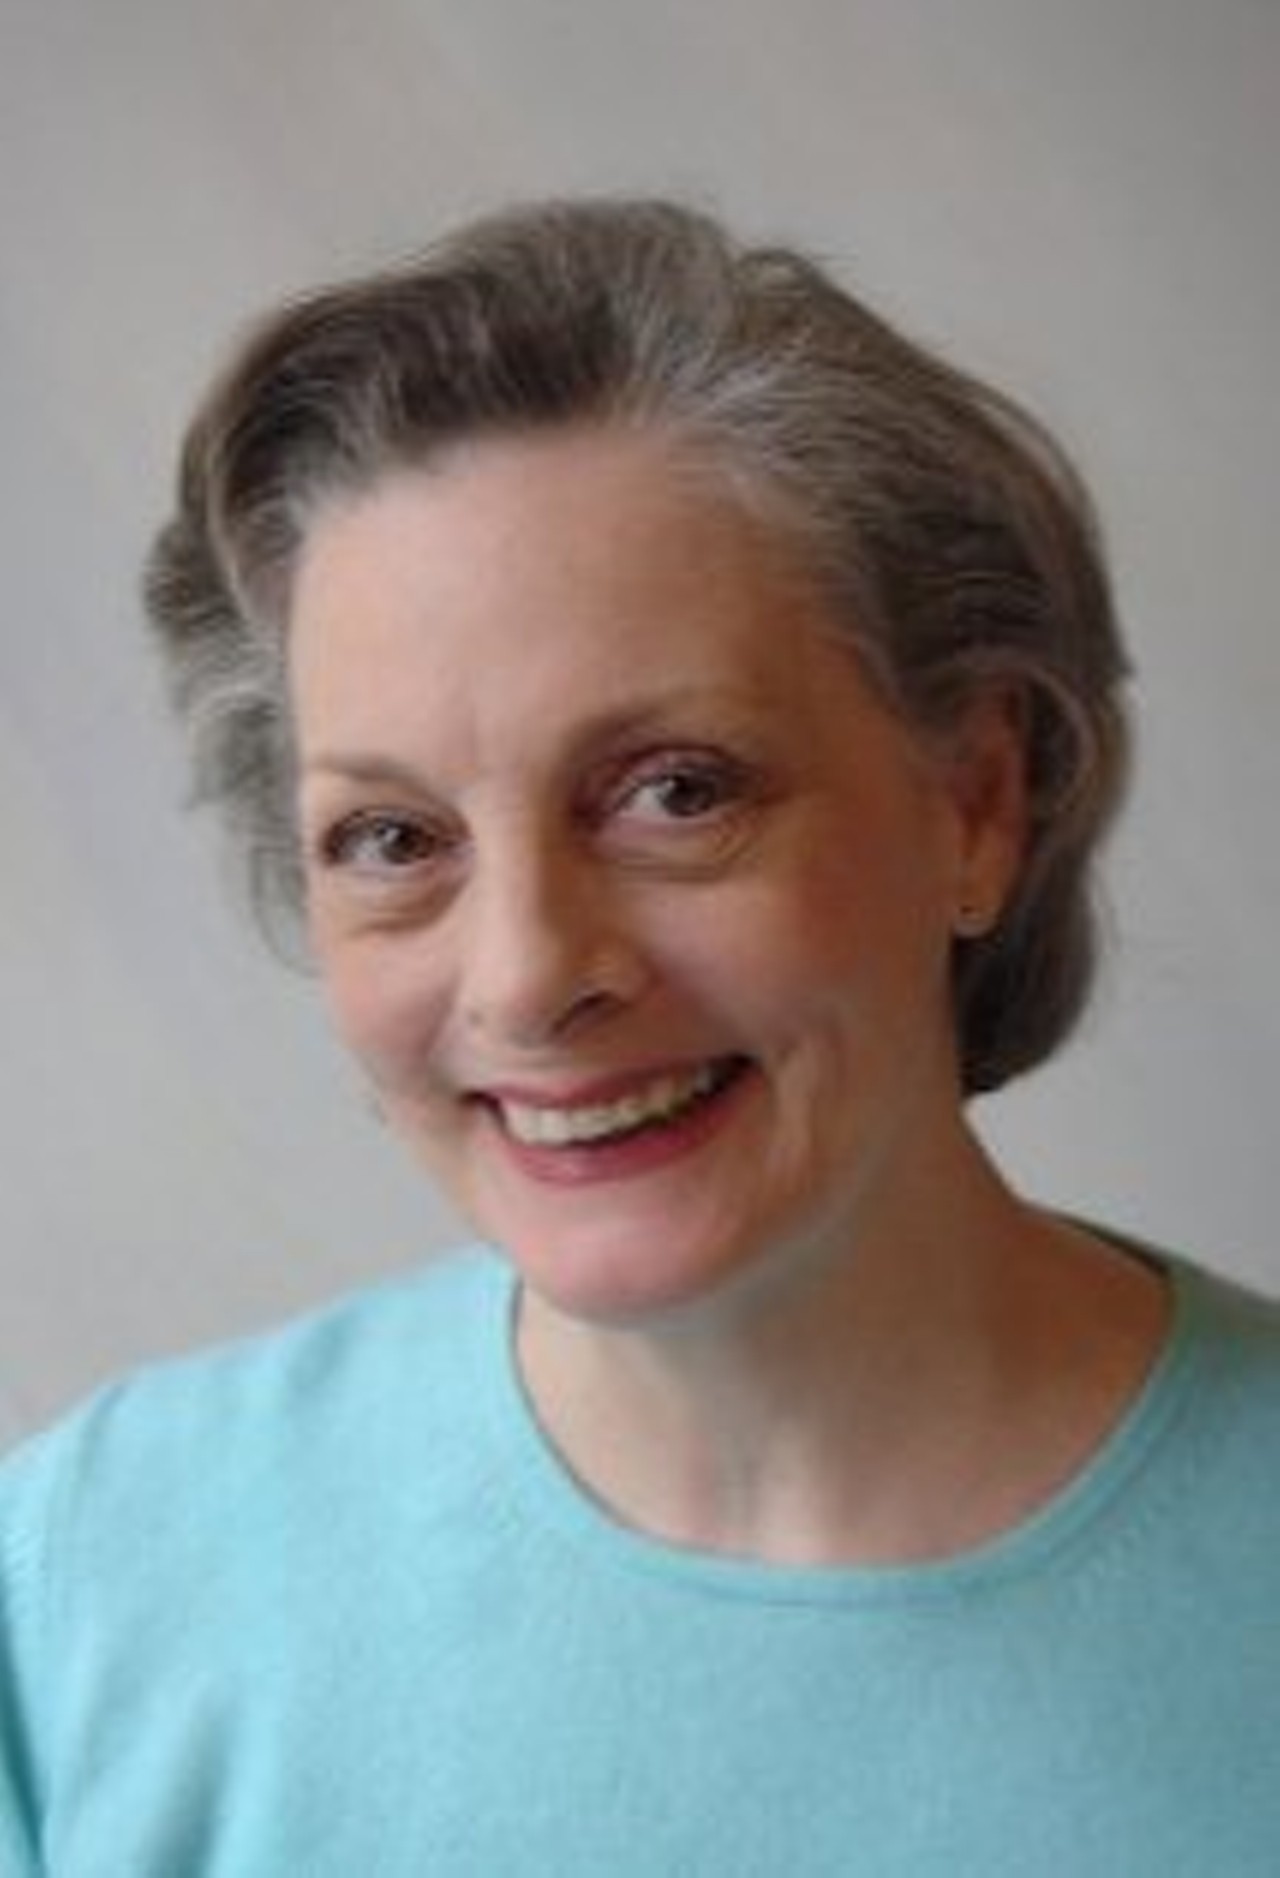 Dana Ivey- An actress who appeared in movies such as, The Color Purple; Two Weeks Notice; and The Help.